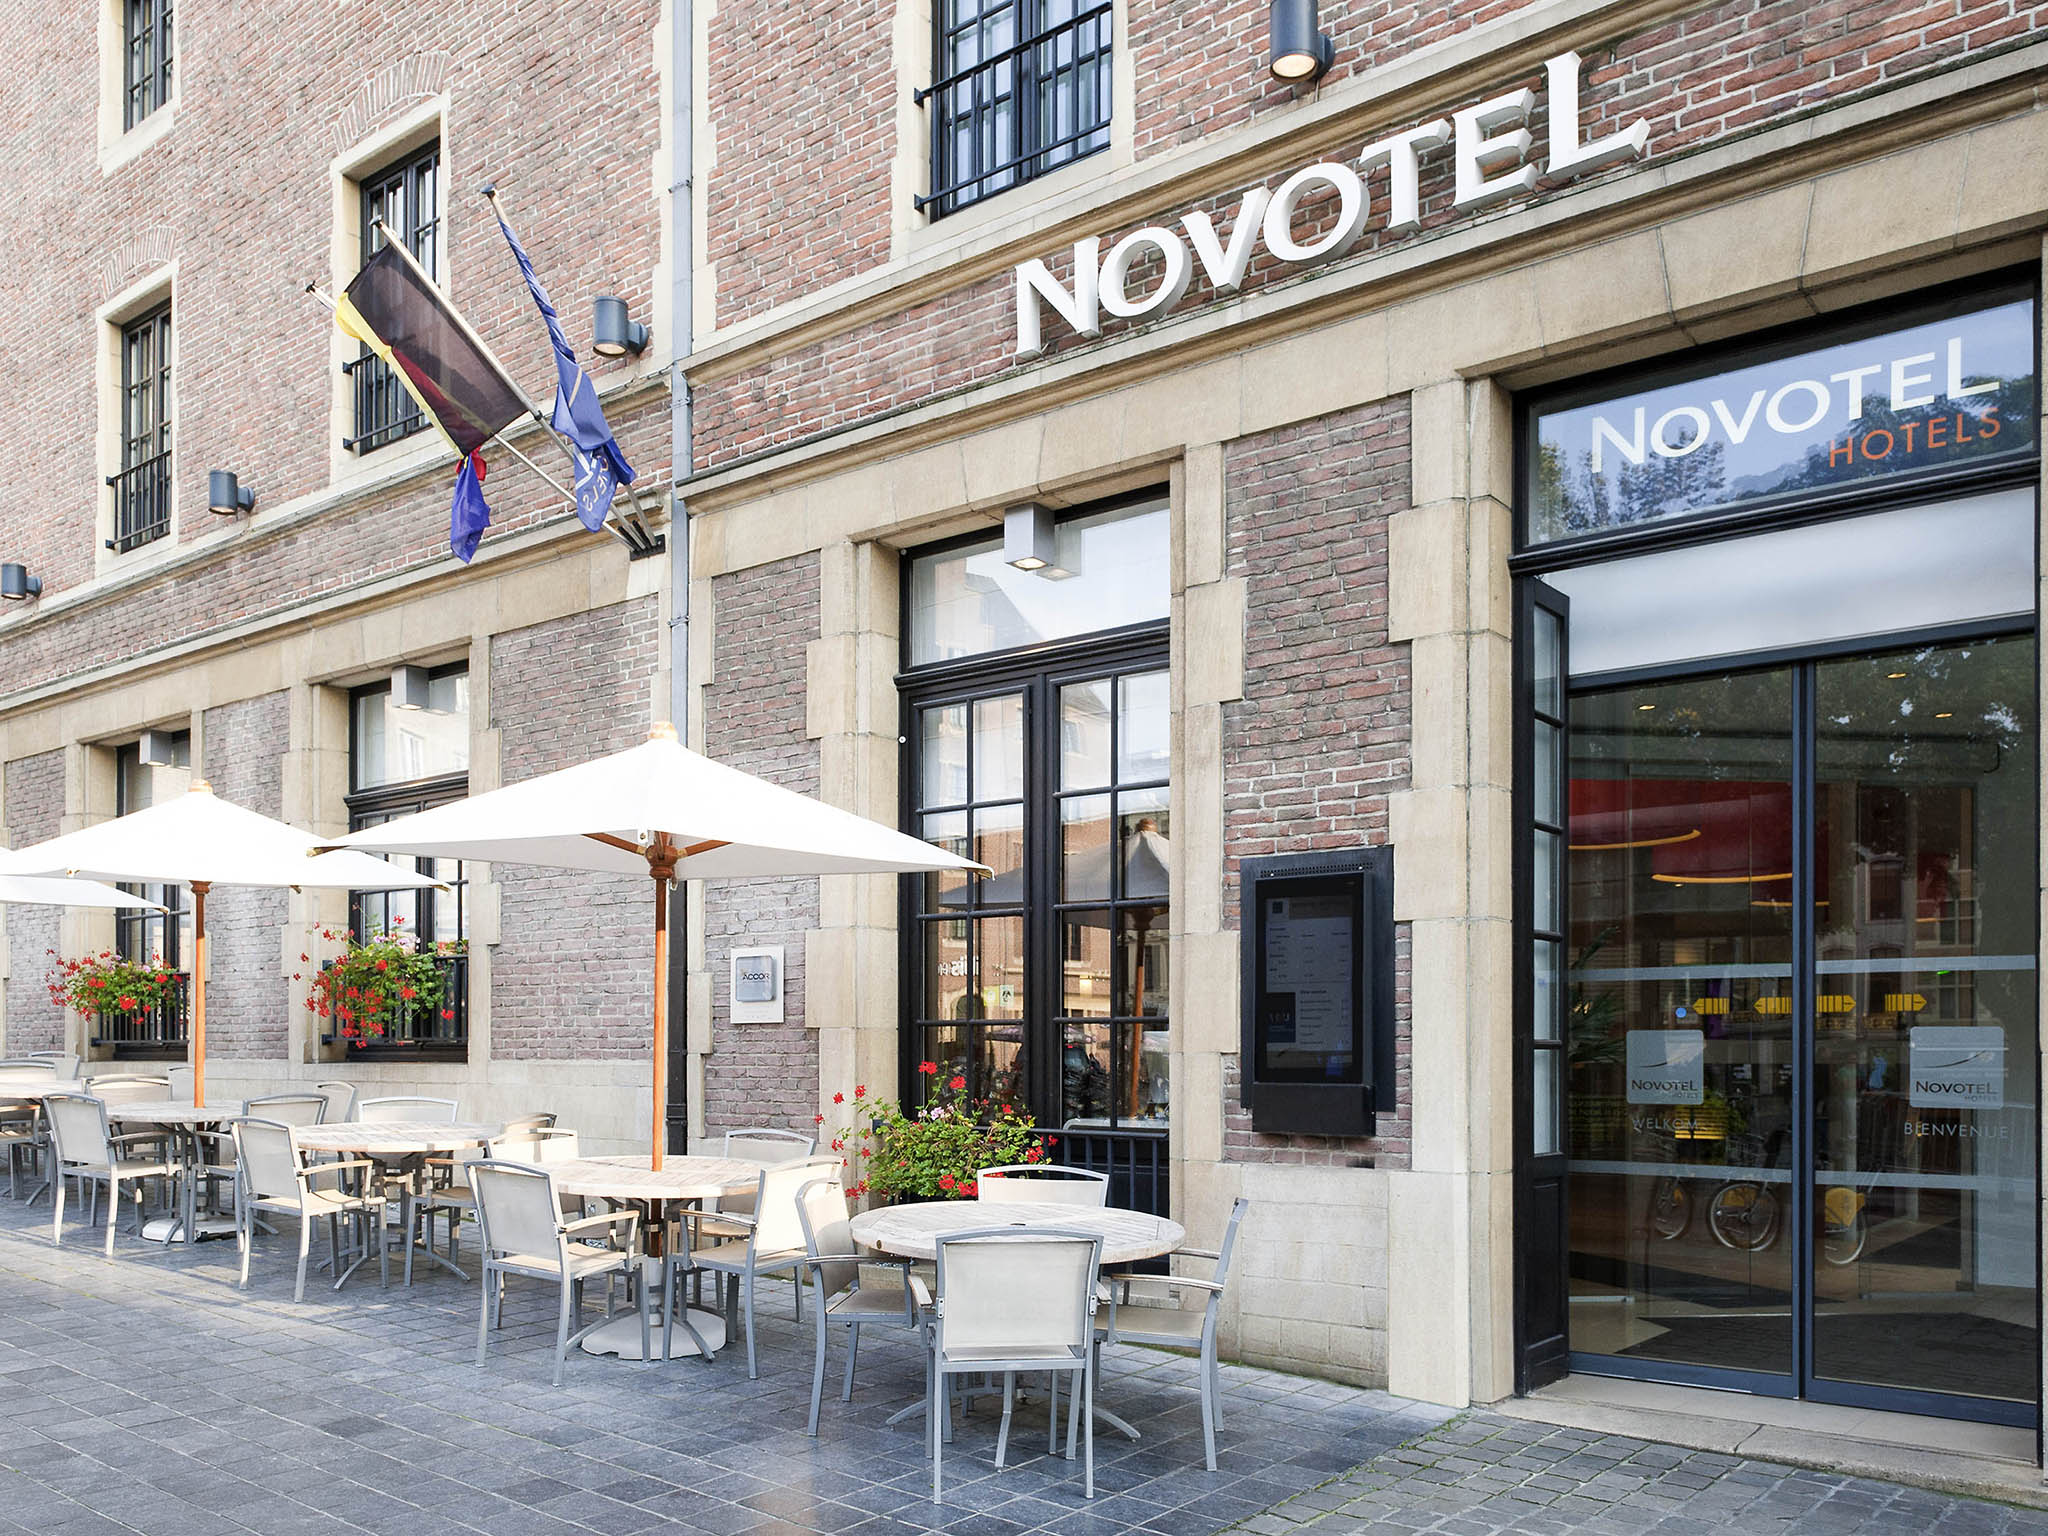 Novotel Brussels off Grand Place <br/>108.89 ew <br/> <a href='http://vakantieoplossing.nl/outpage/?id=992ac190dd49692f5060a019e0af8e3b' target='_blank'>View Details</a>